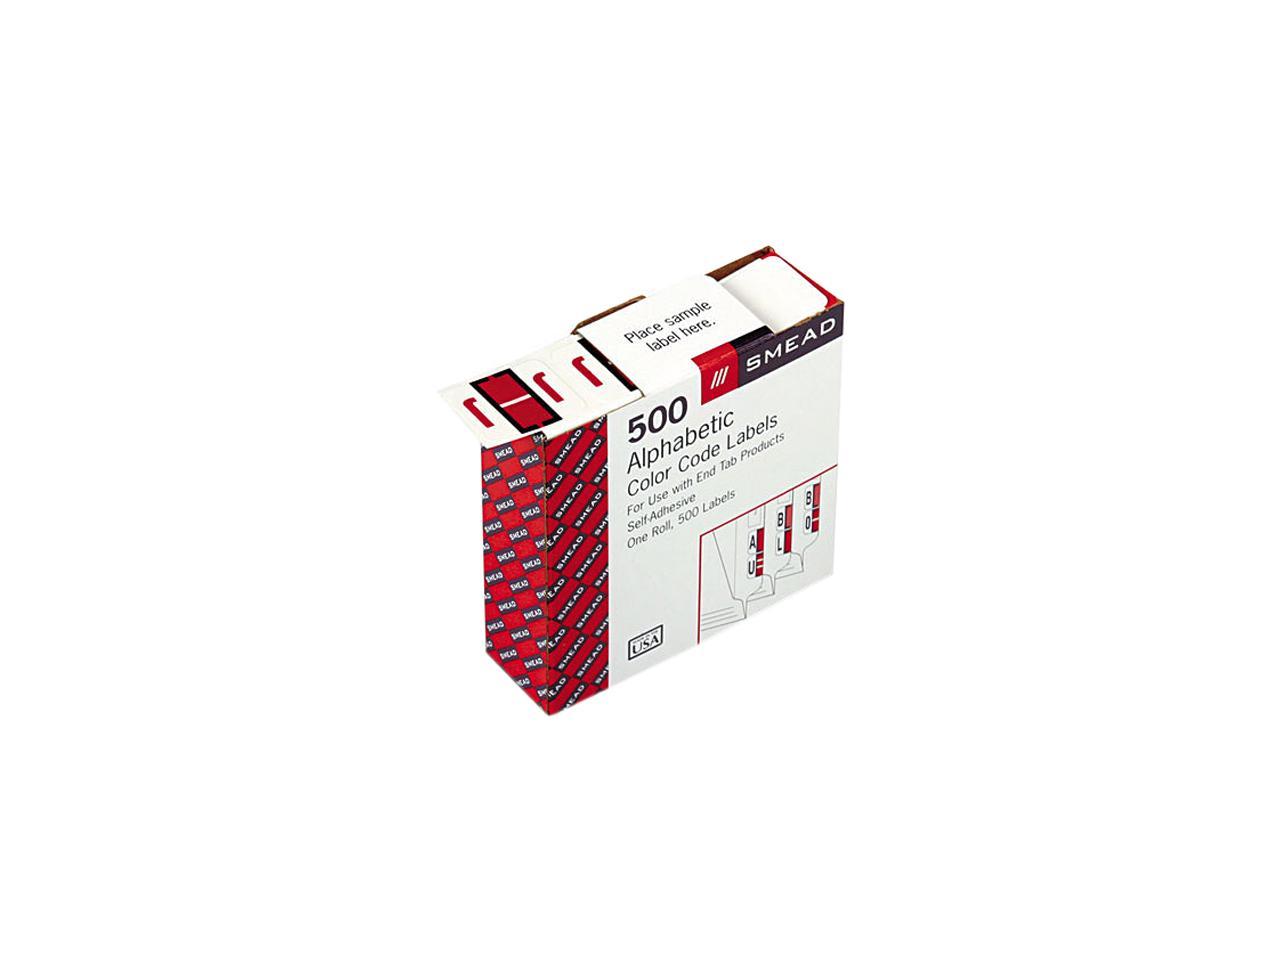 Smead 67080 A-Z Color-Coded Bar-Style End Tab Labels, Letter J, Red, 500/Roll - image 1 of 3